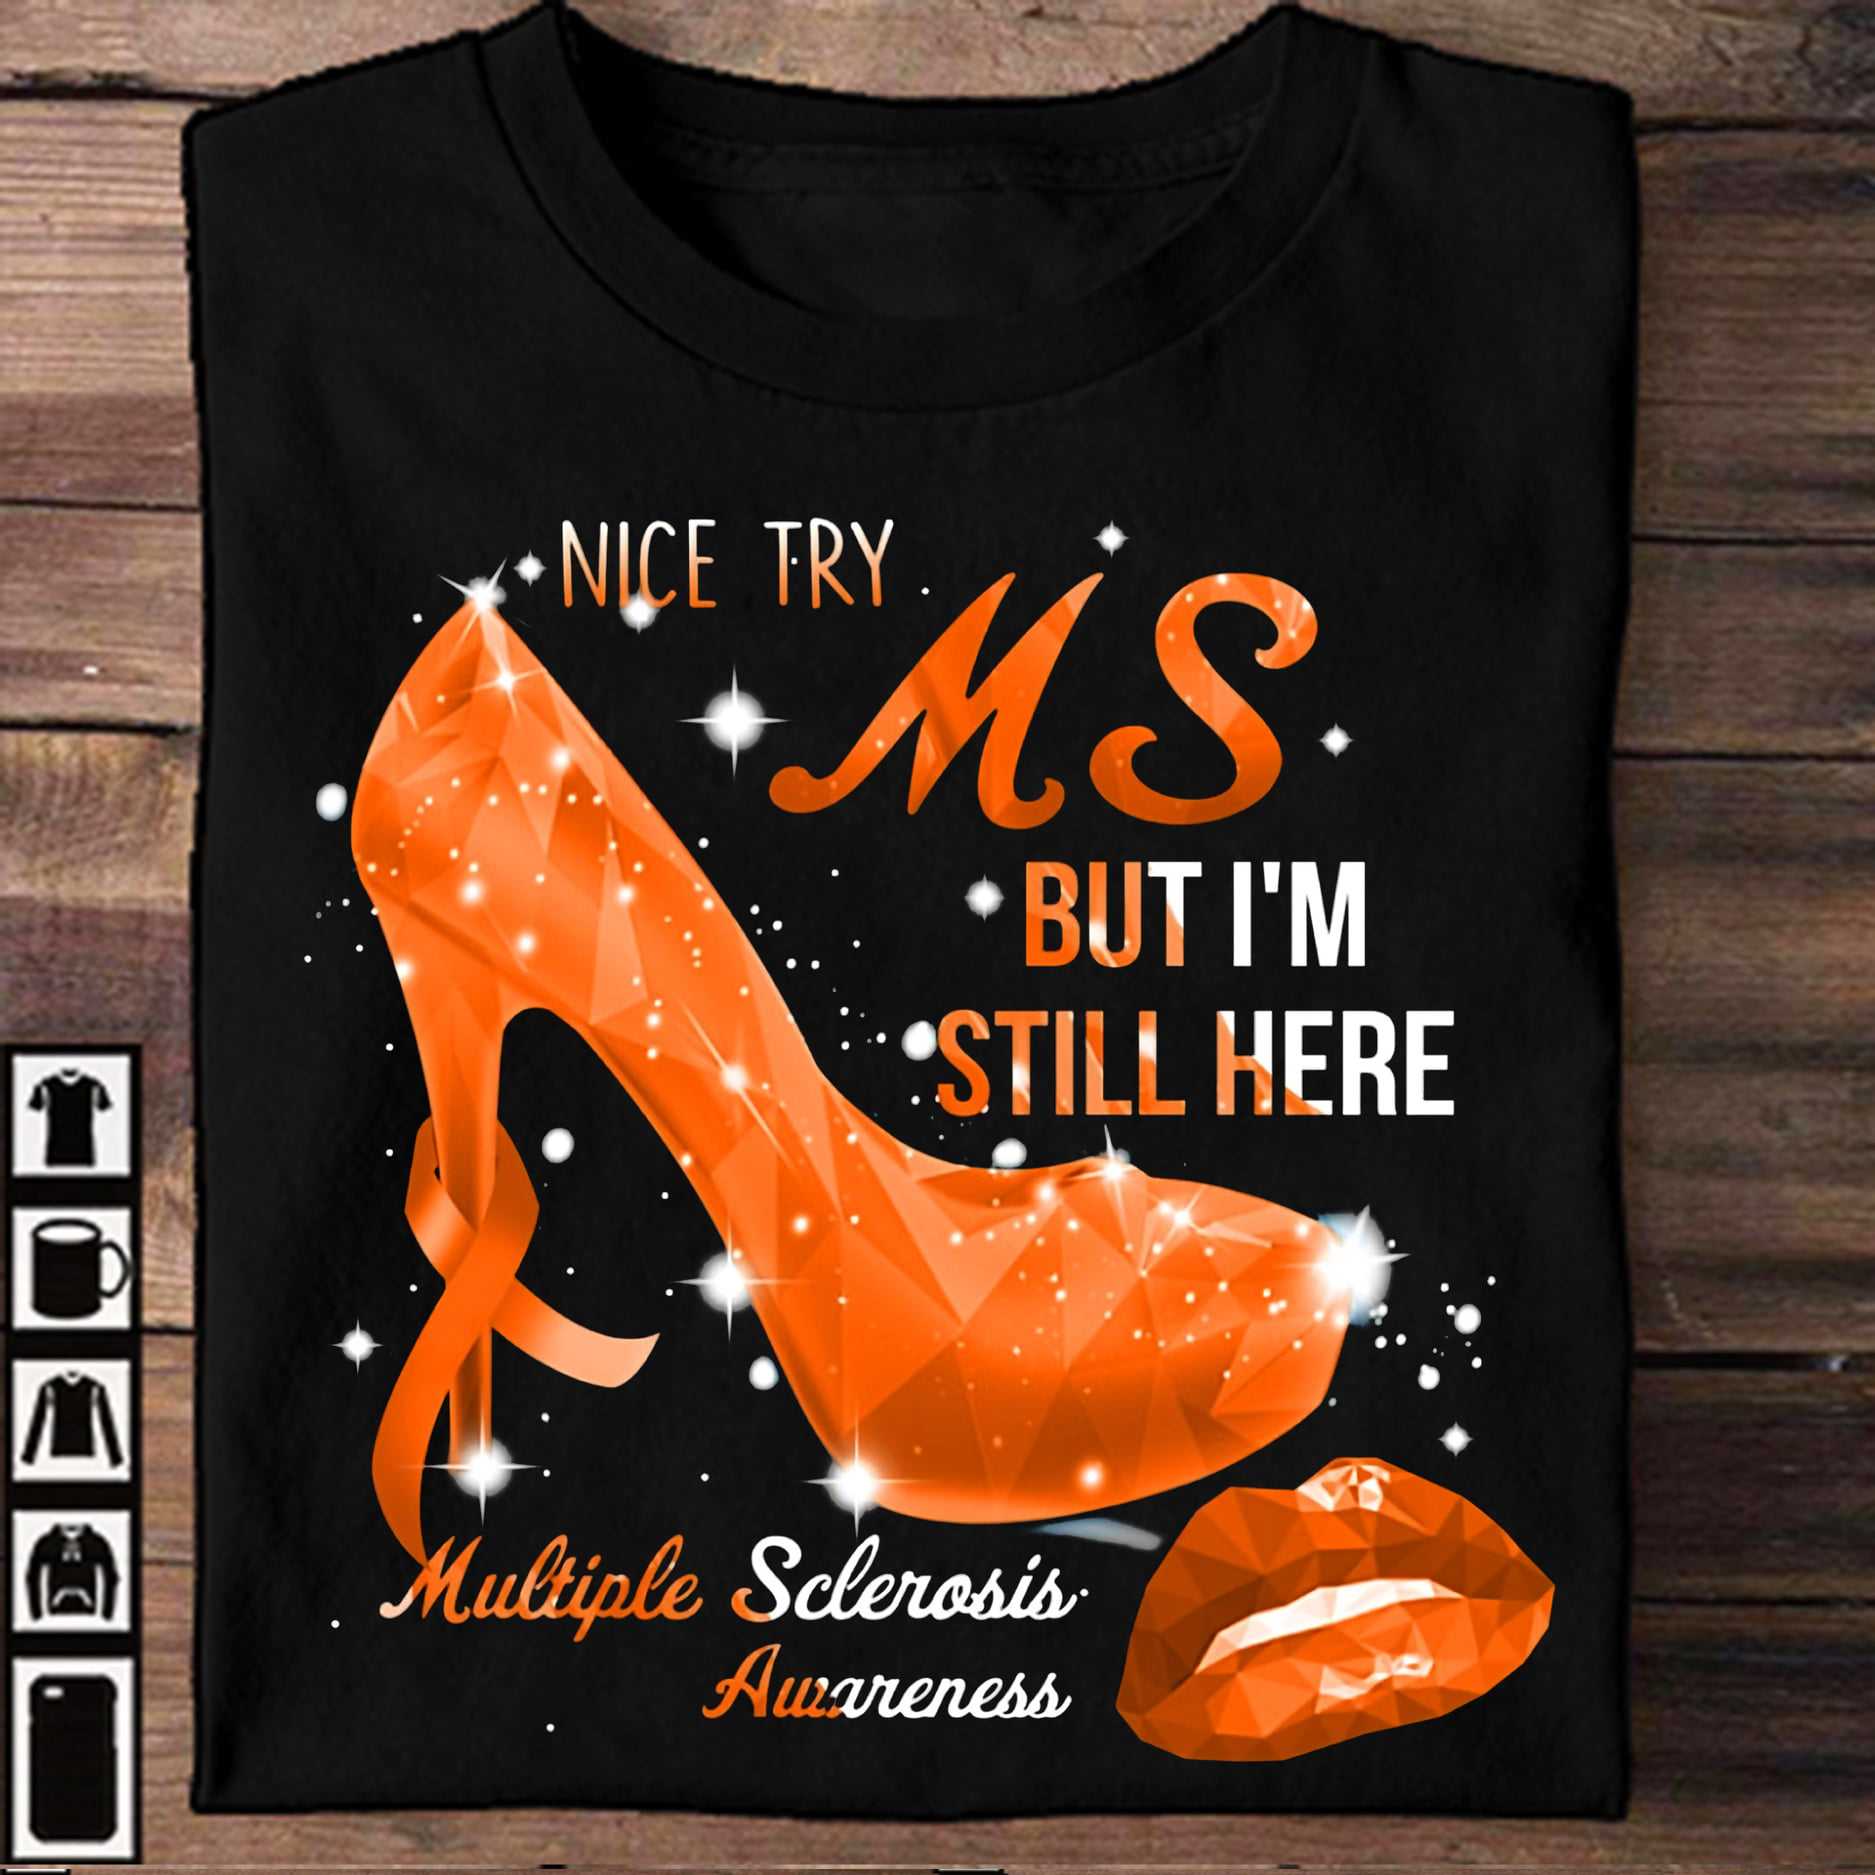 MS High Heels, MS Woman - Nice try MS but i'm still here multiple sclerosis awareness